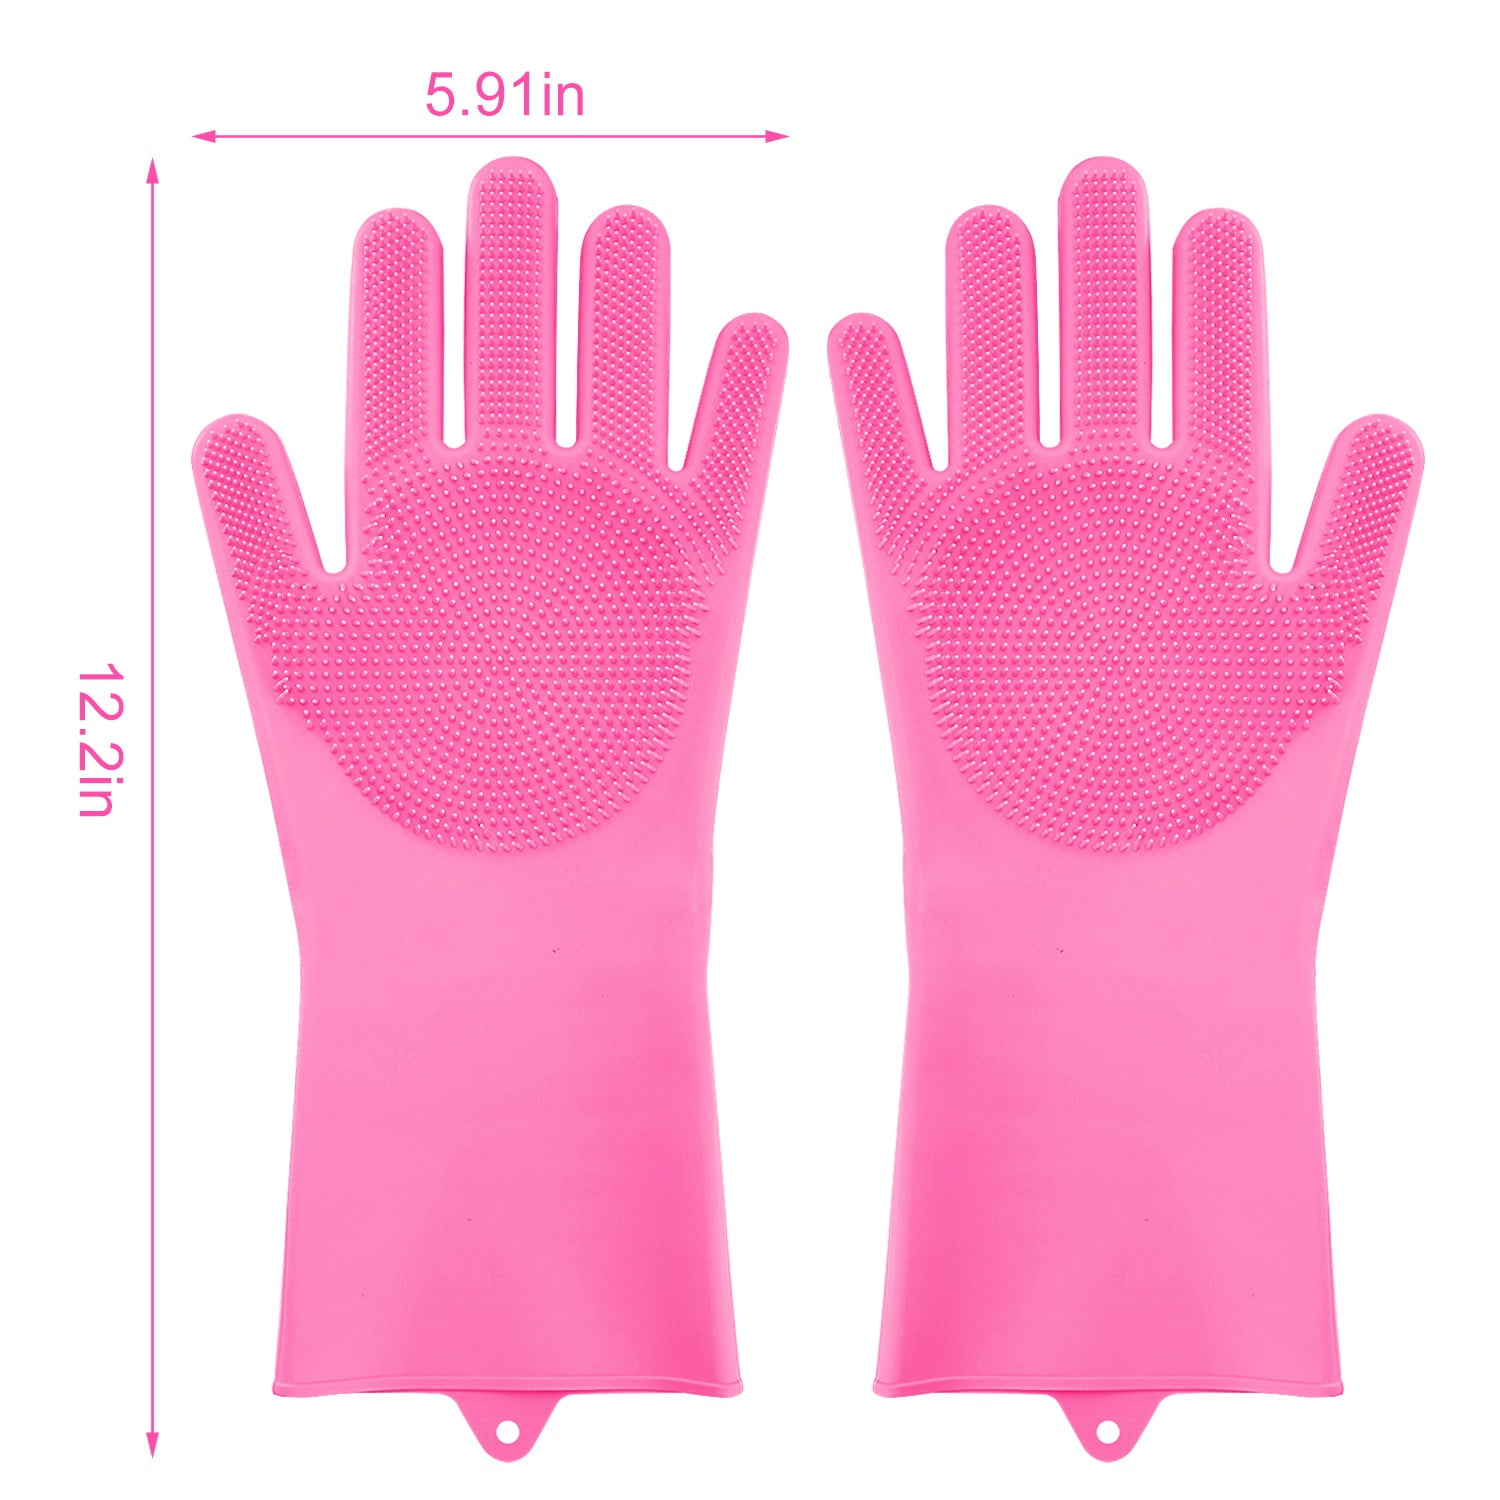 Buy The Best Silicone Dish Cleaning Gloves At Nuseas – NuSEAS